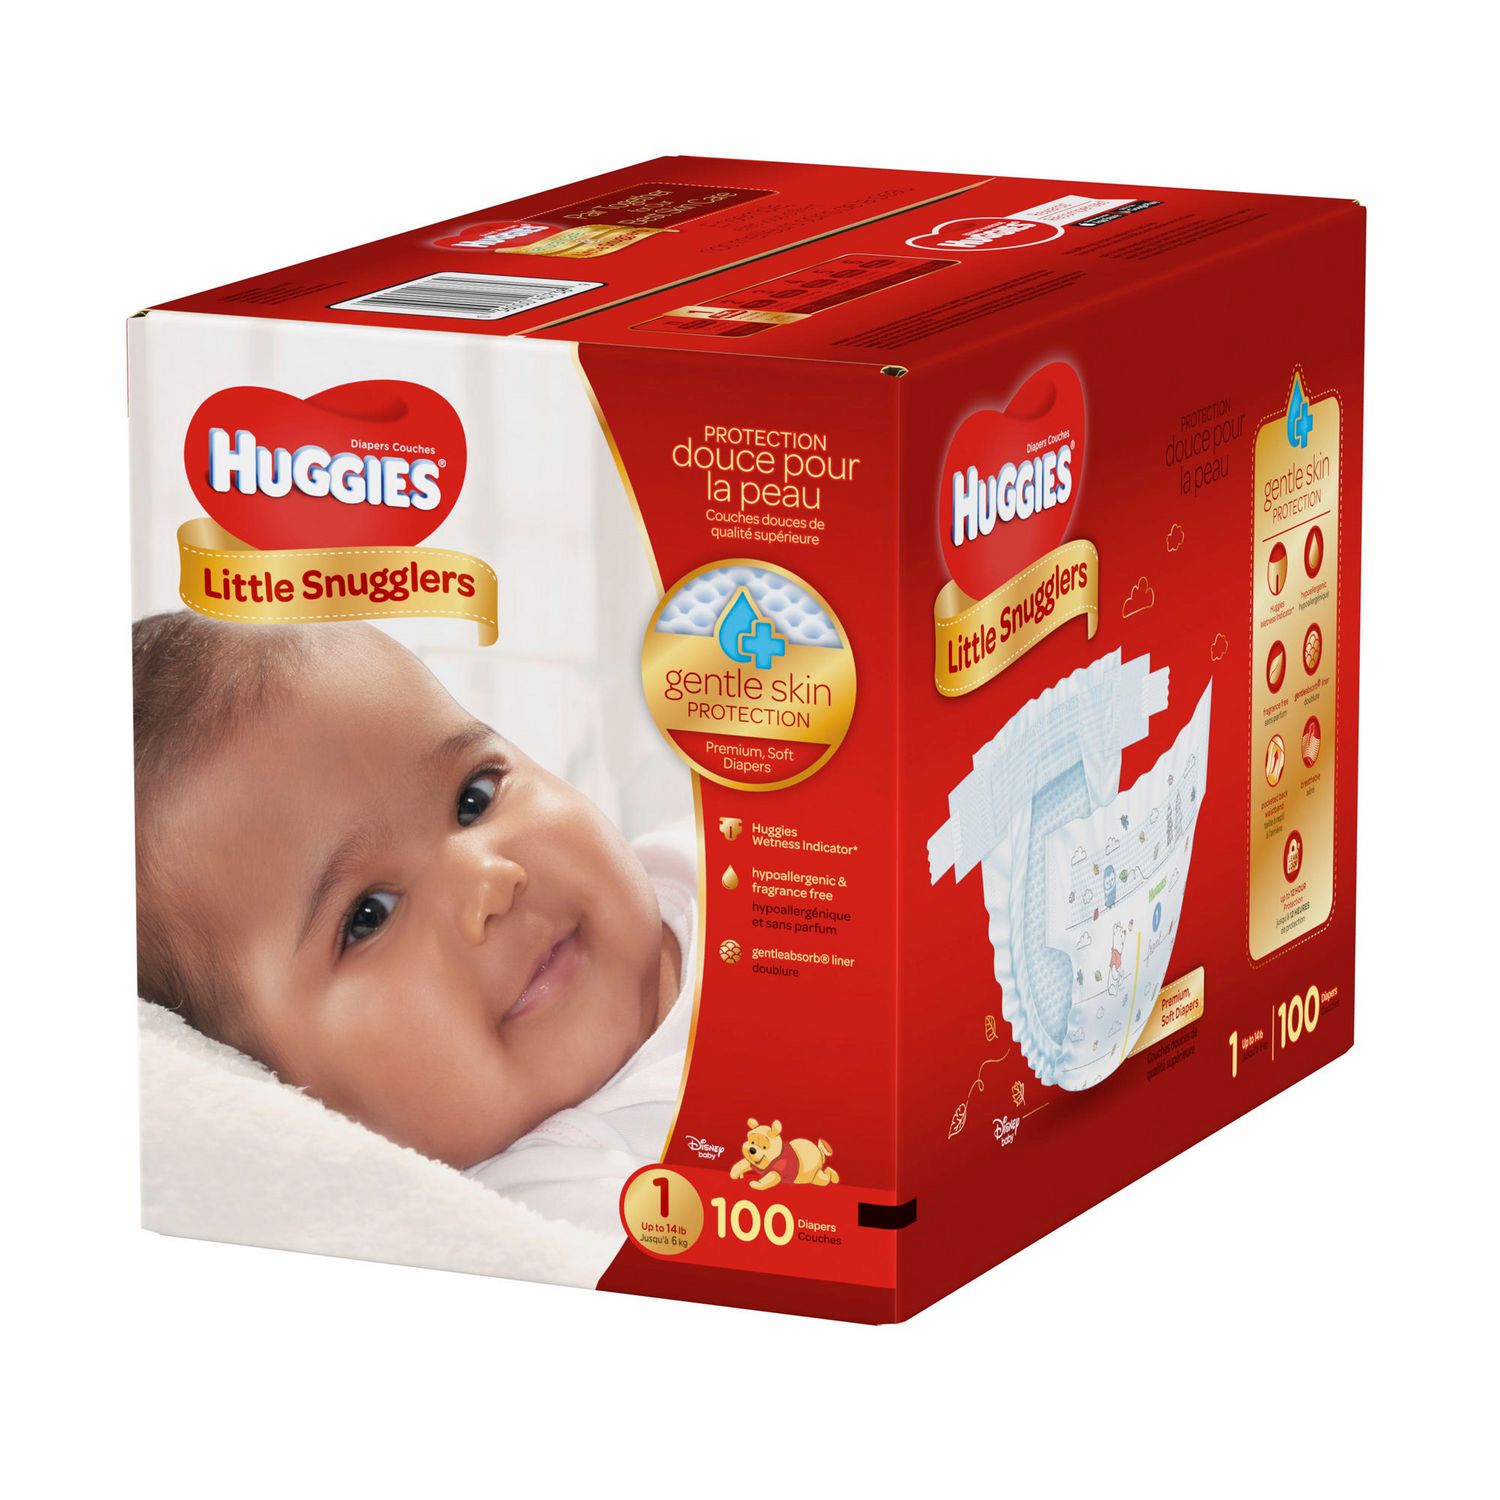 Huggies couches pour bébés huggies little snugglers, emballage giga (taille  2) - little snugglers diapers size 2 (84 units), Delivery Near You